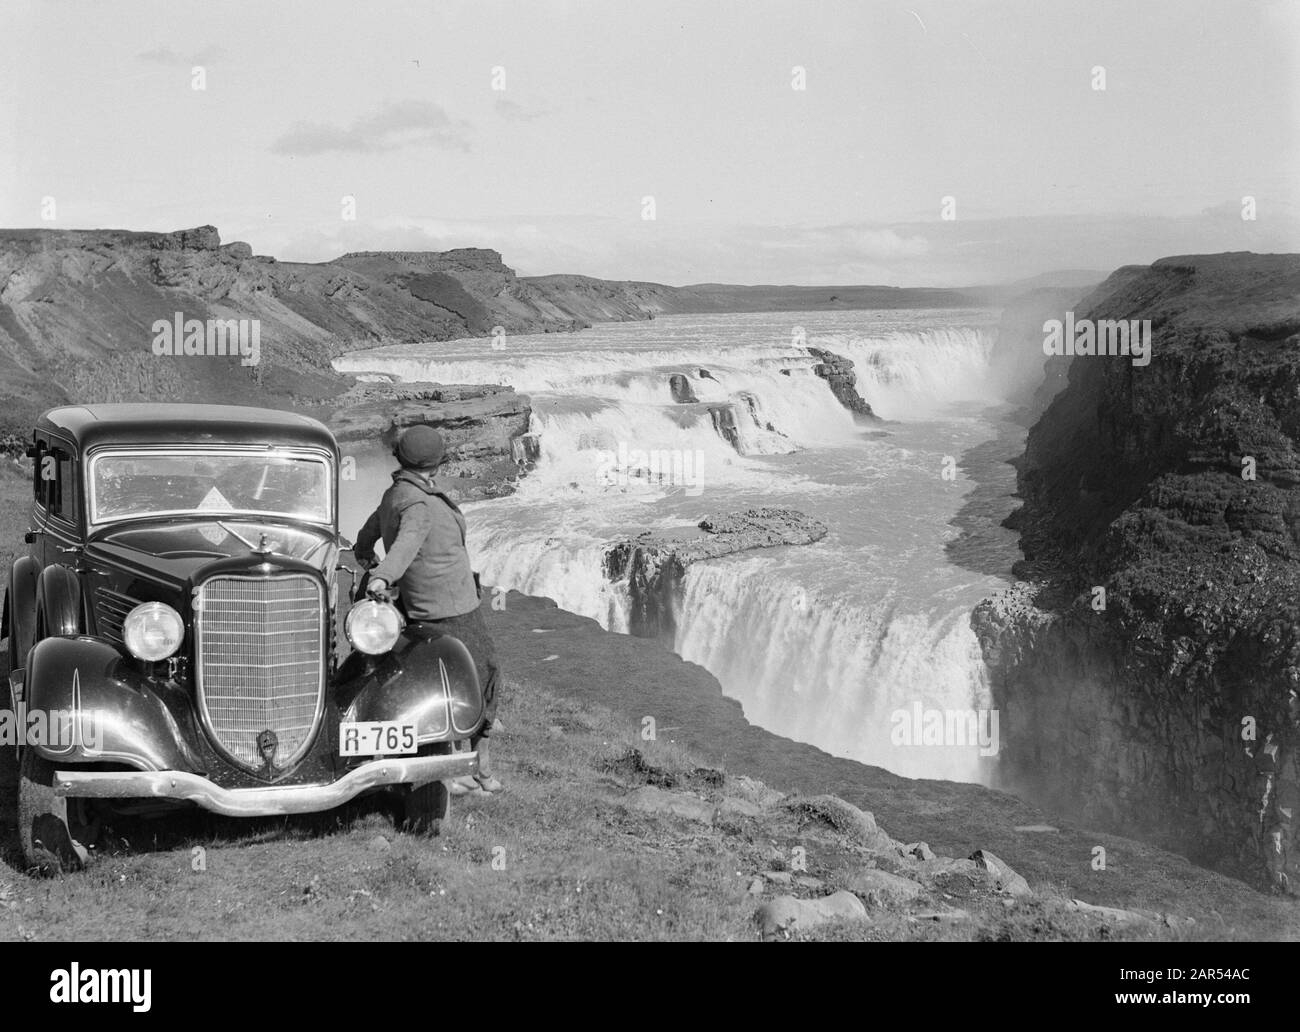 Iceland  Gullfoss. Waterfalls in the Hvítá (White River) in South Iceland Date: 1934 Location: Iceland Keywords: cars, hills, landscapes, rivers, waterfalls Stock Photo